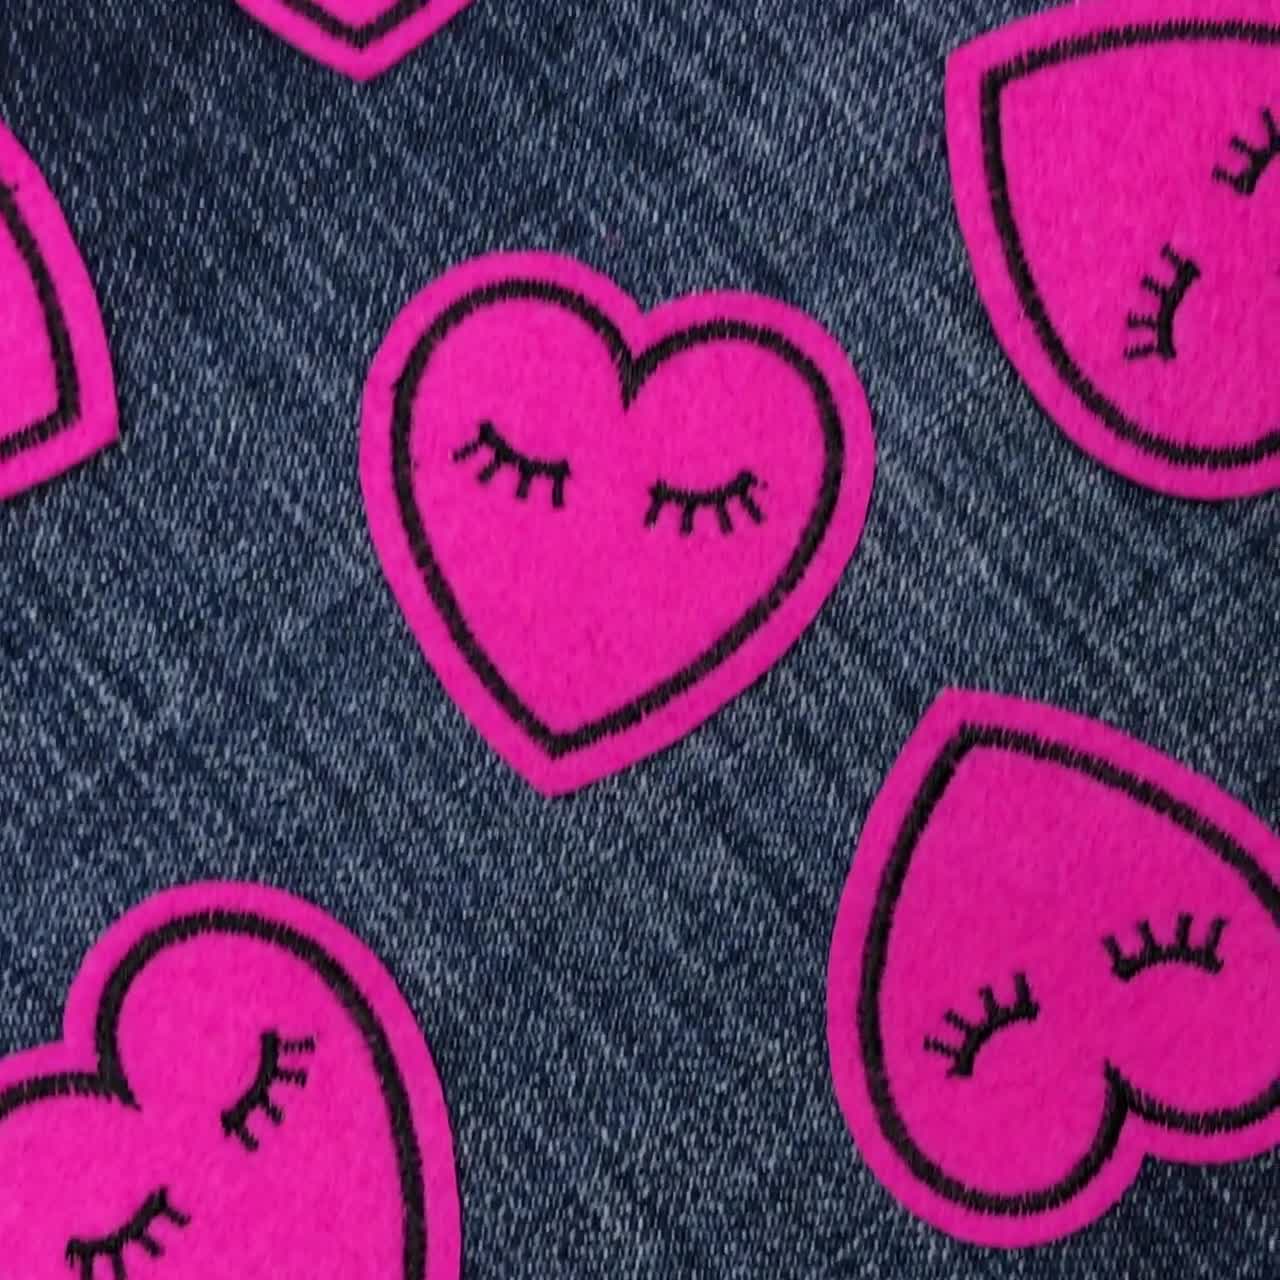 3 X Pink Heart Iron-on Patches, Embroidered Fabric Applique, Pink